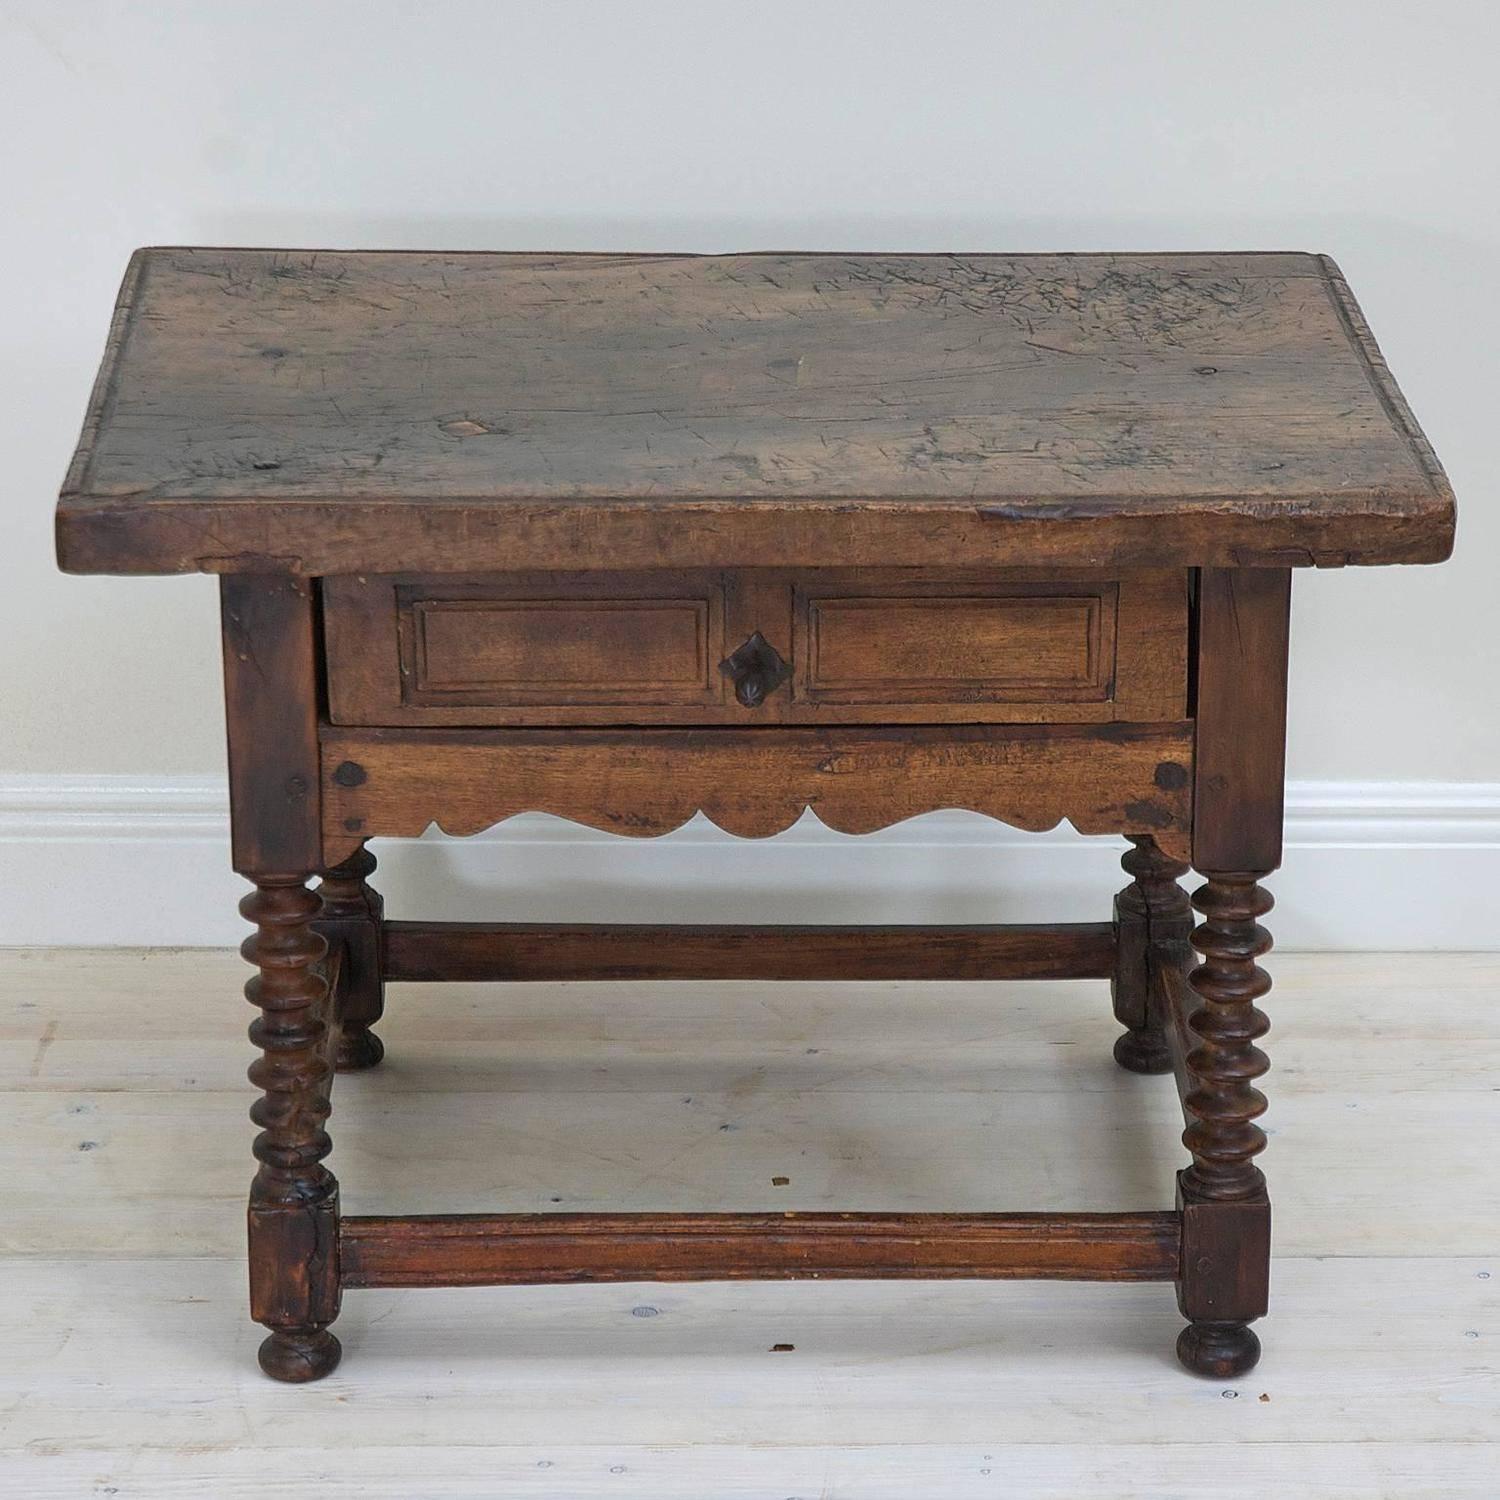 A charming Spanish 18th century Baroque table in walnut that historically was used by a cobbler and features a weathered top that attests to the hammering work involved in the process of making and repairing shoes. The base offers a storage drawer